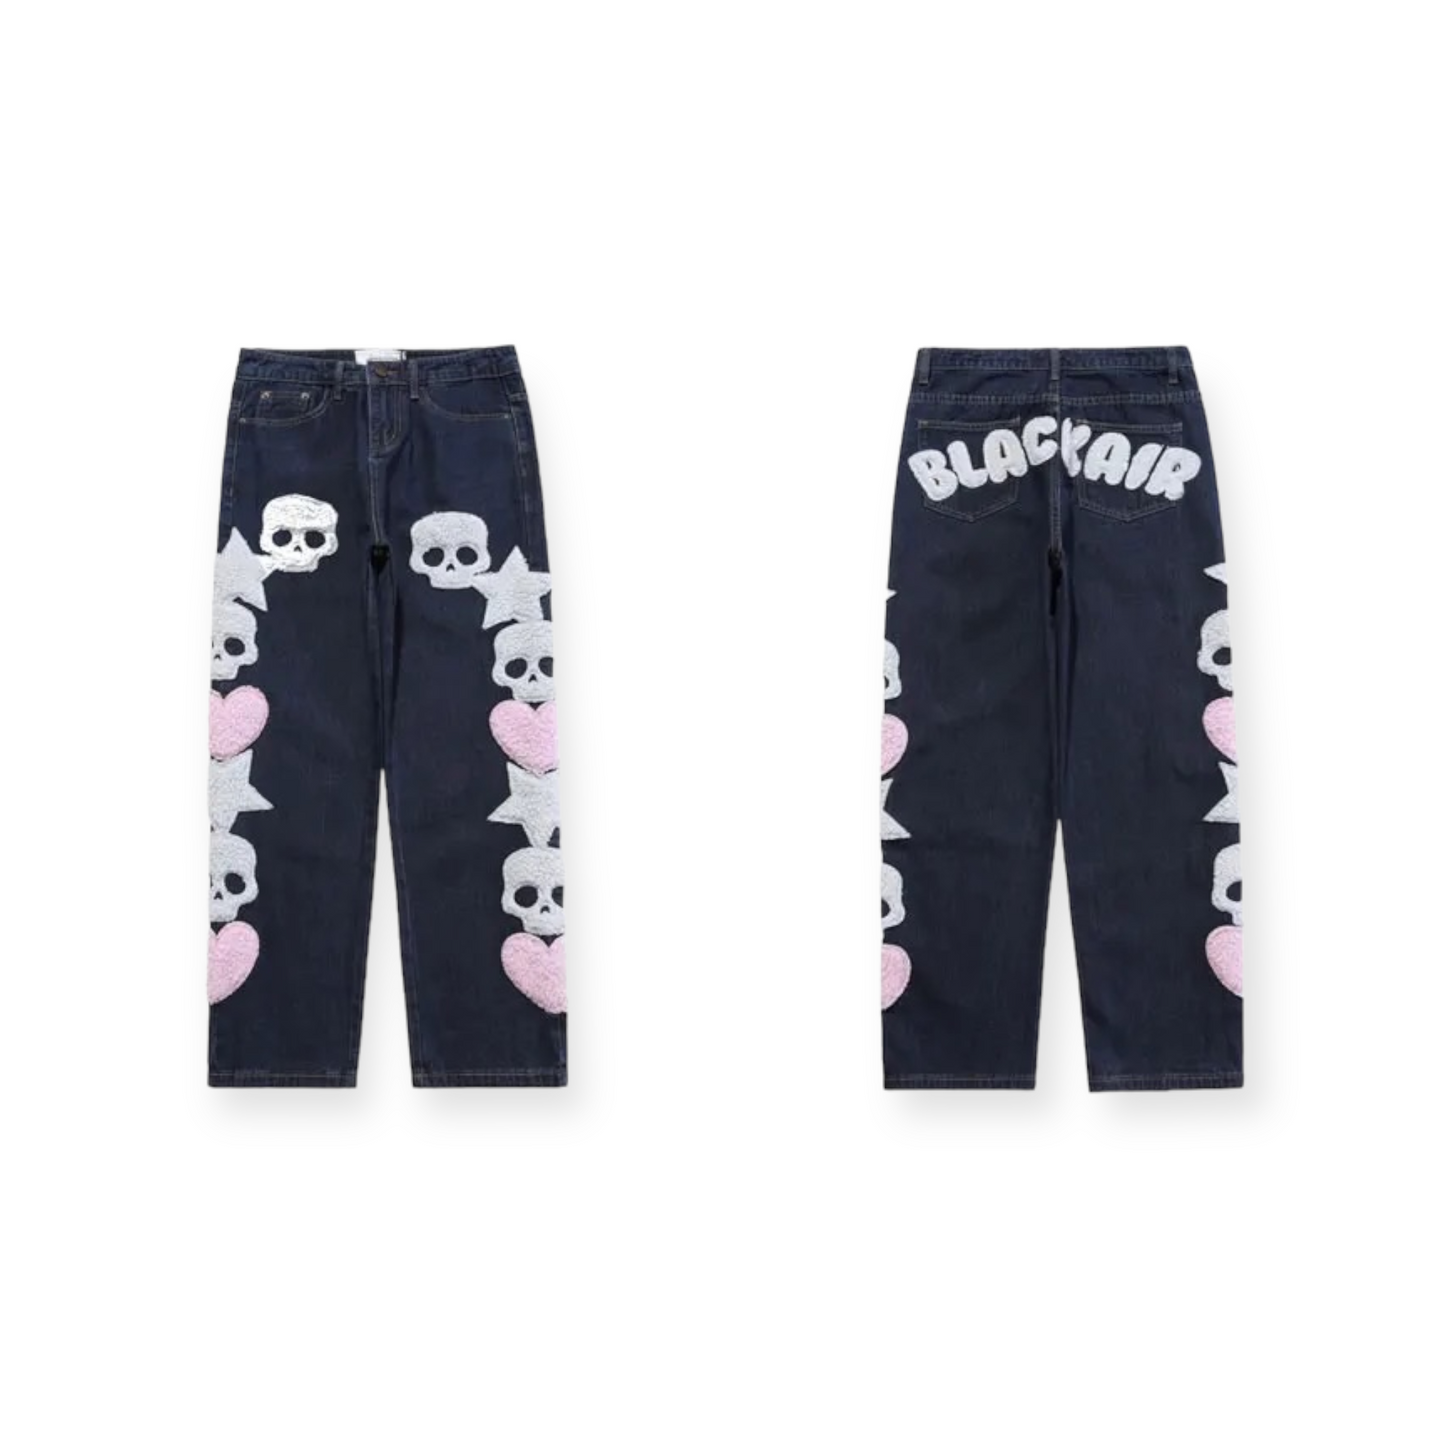 GONTHWID Embroidered Skull Star Baggy Denim Jeans